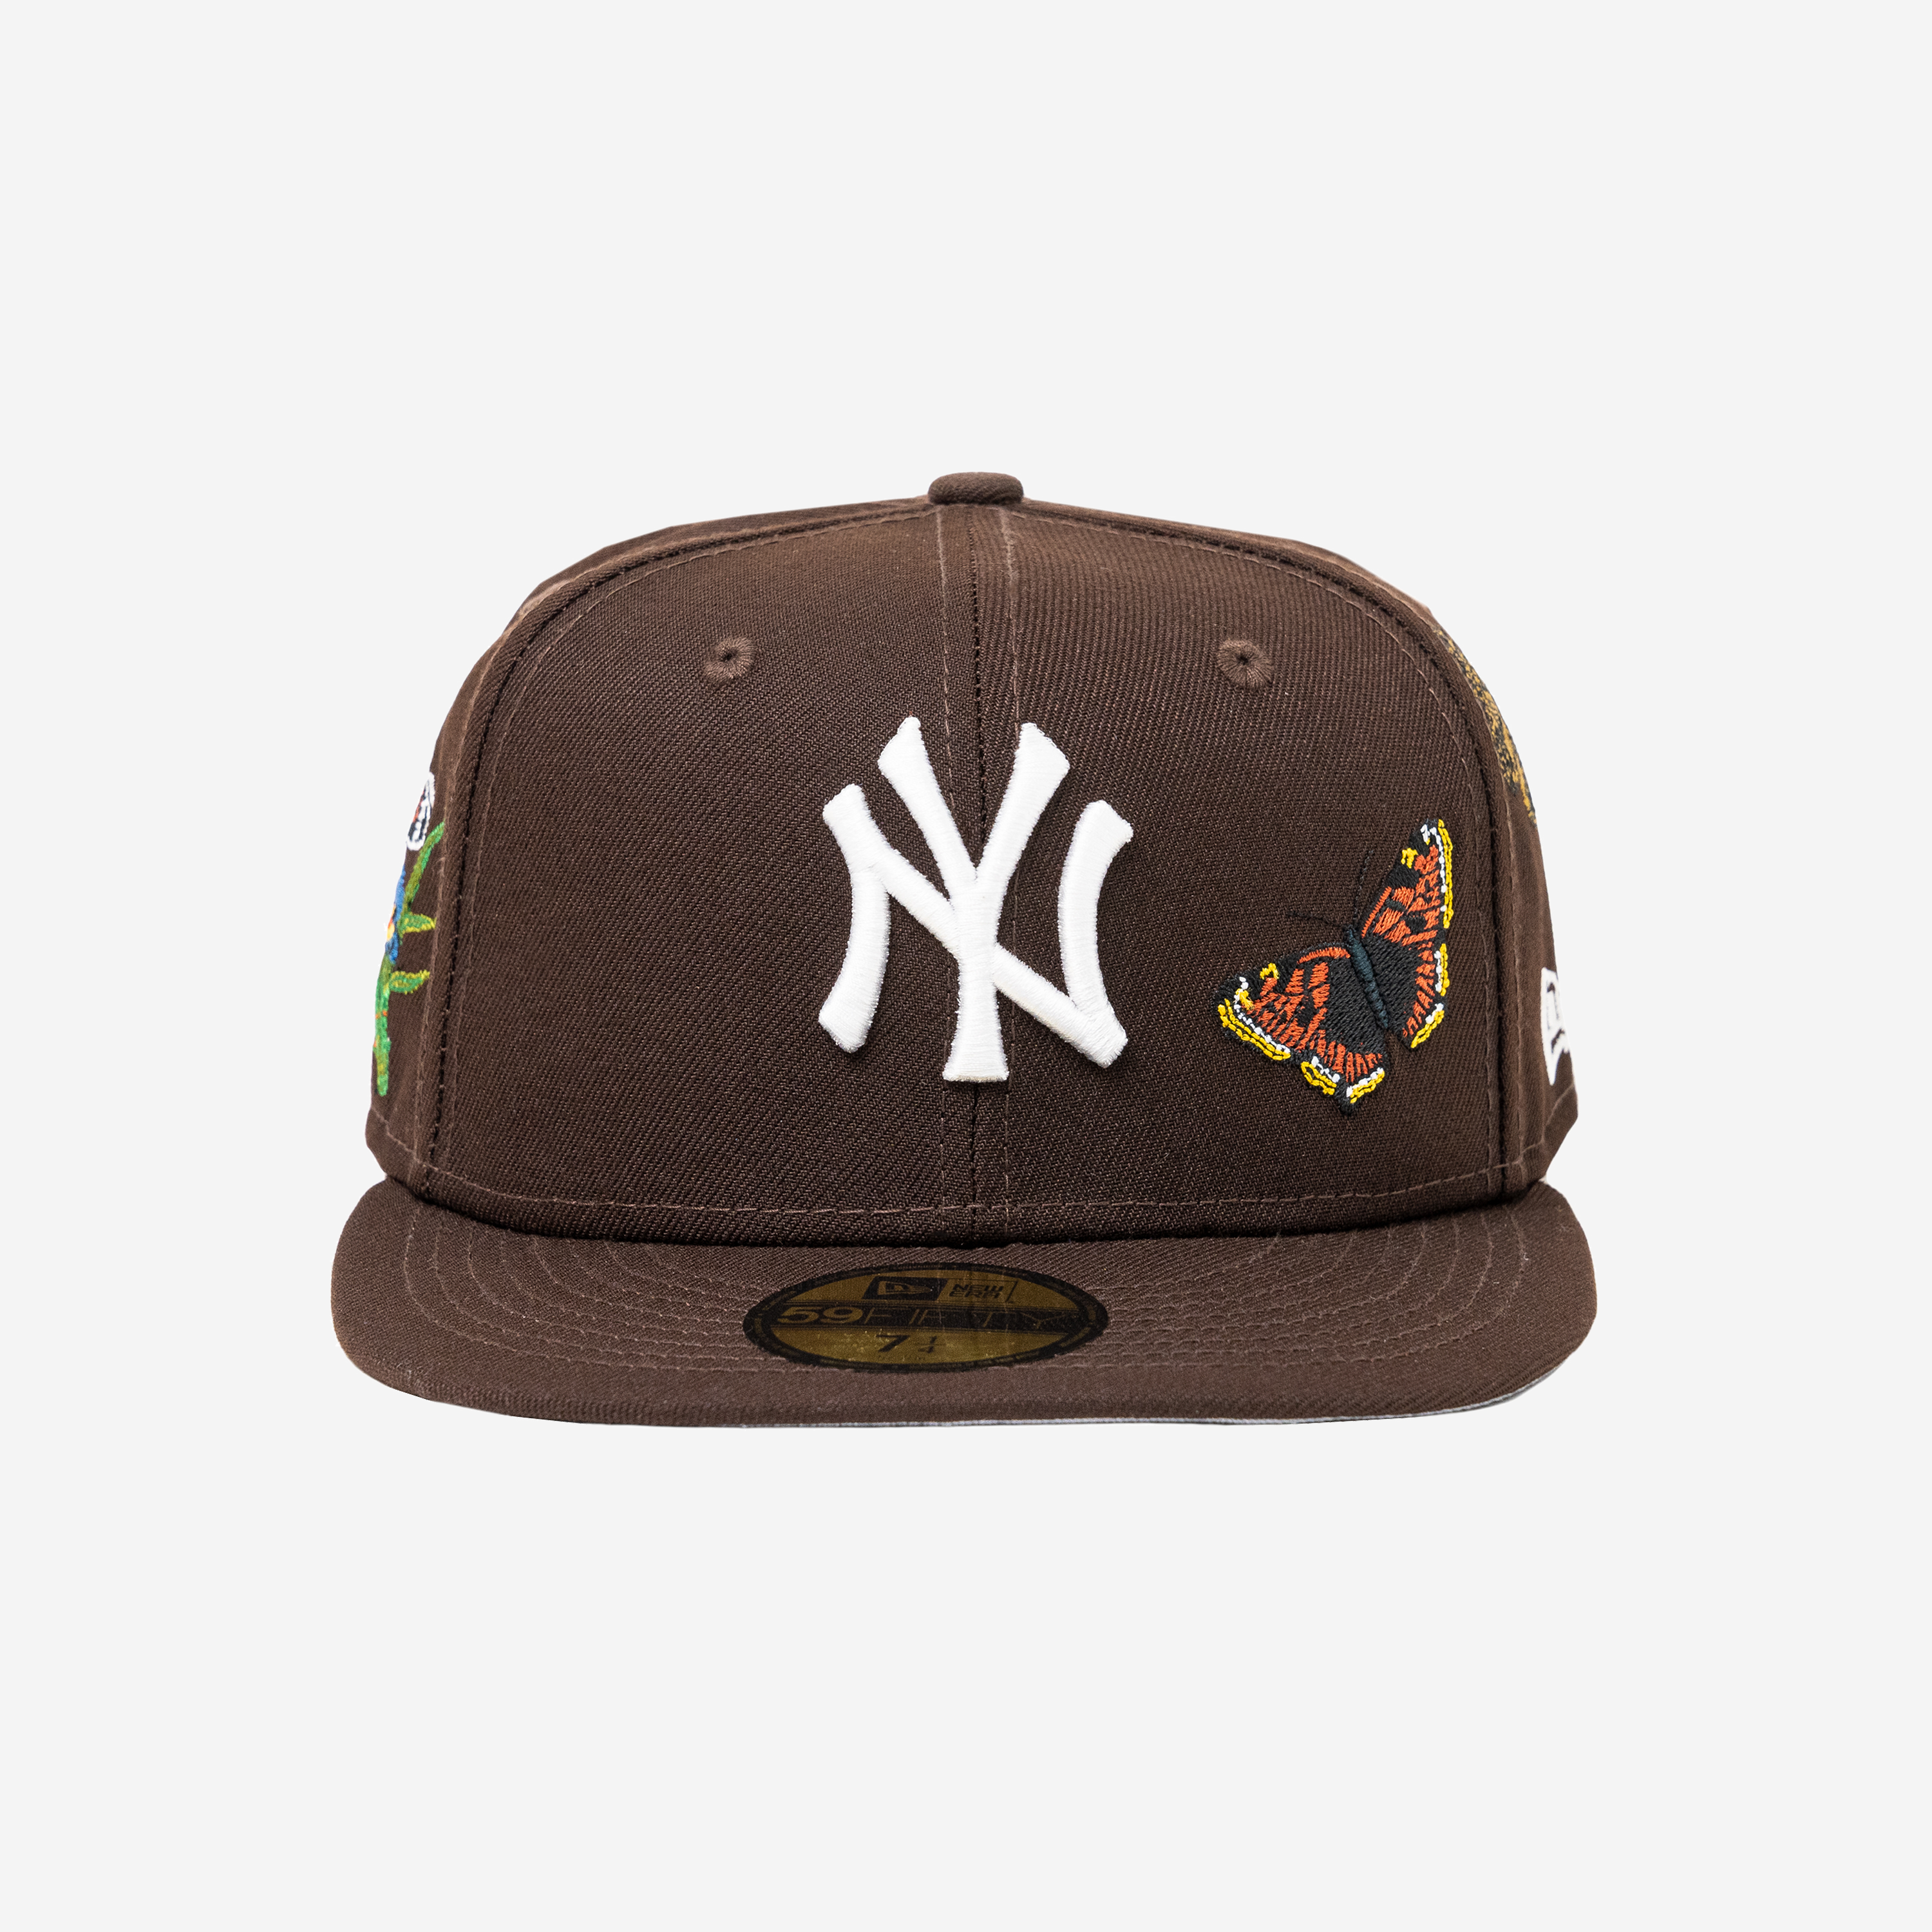 Fitted Long Brim Hat YANKEES 7 5 8 XL 帽子 - srlteducation.com